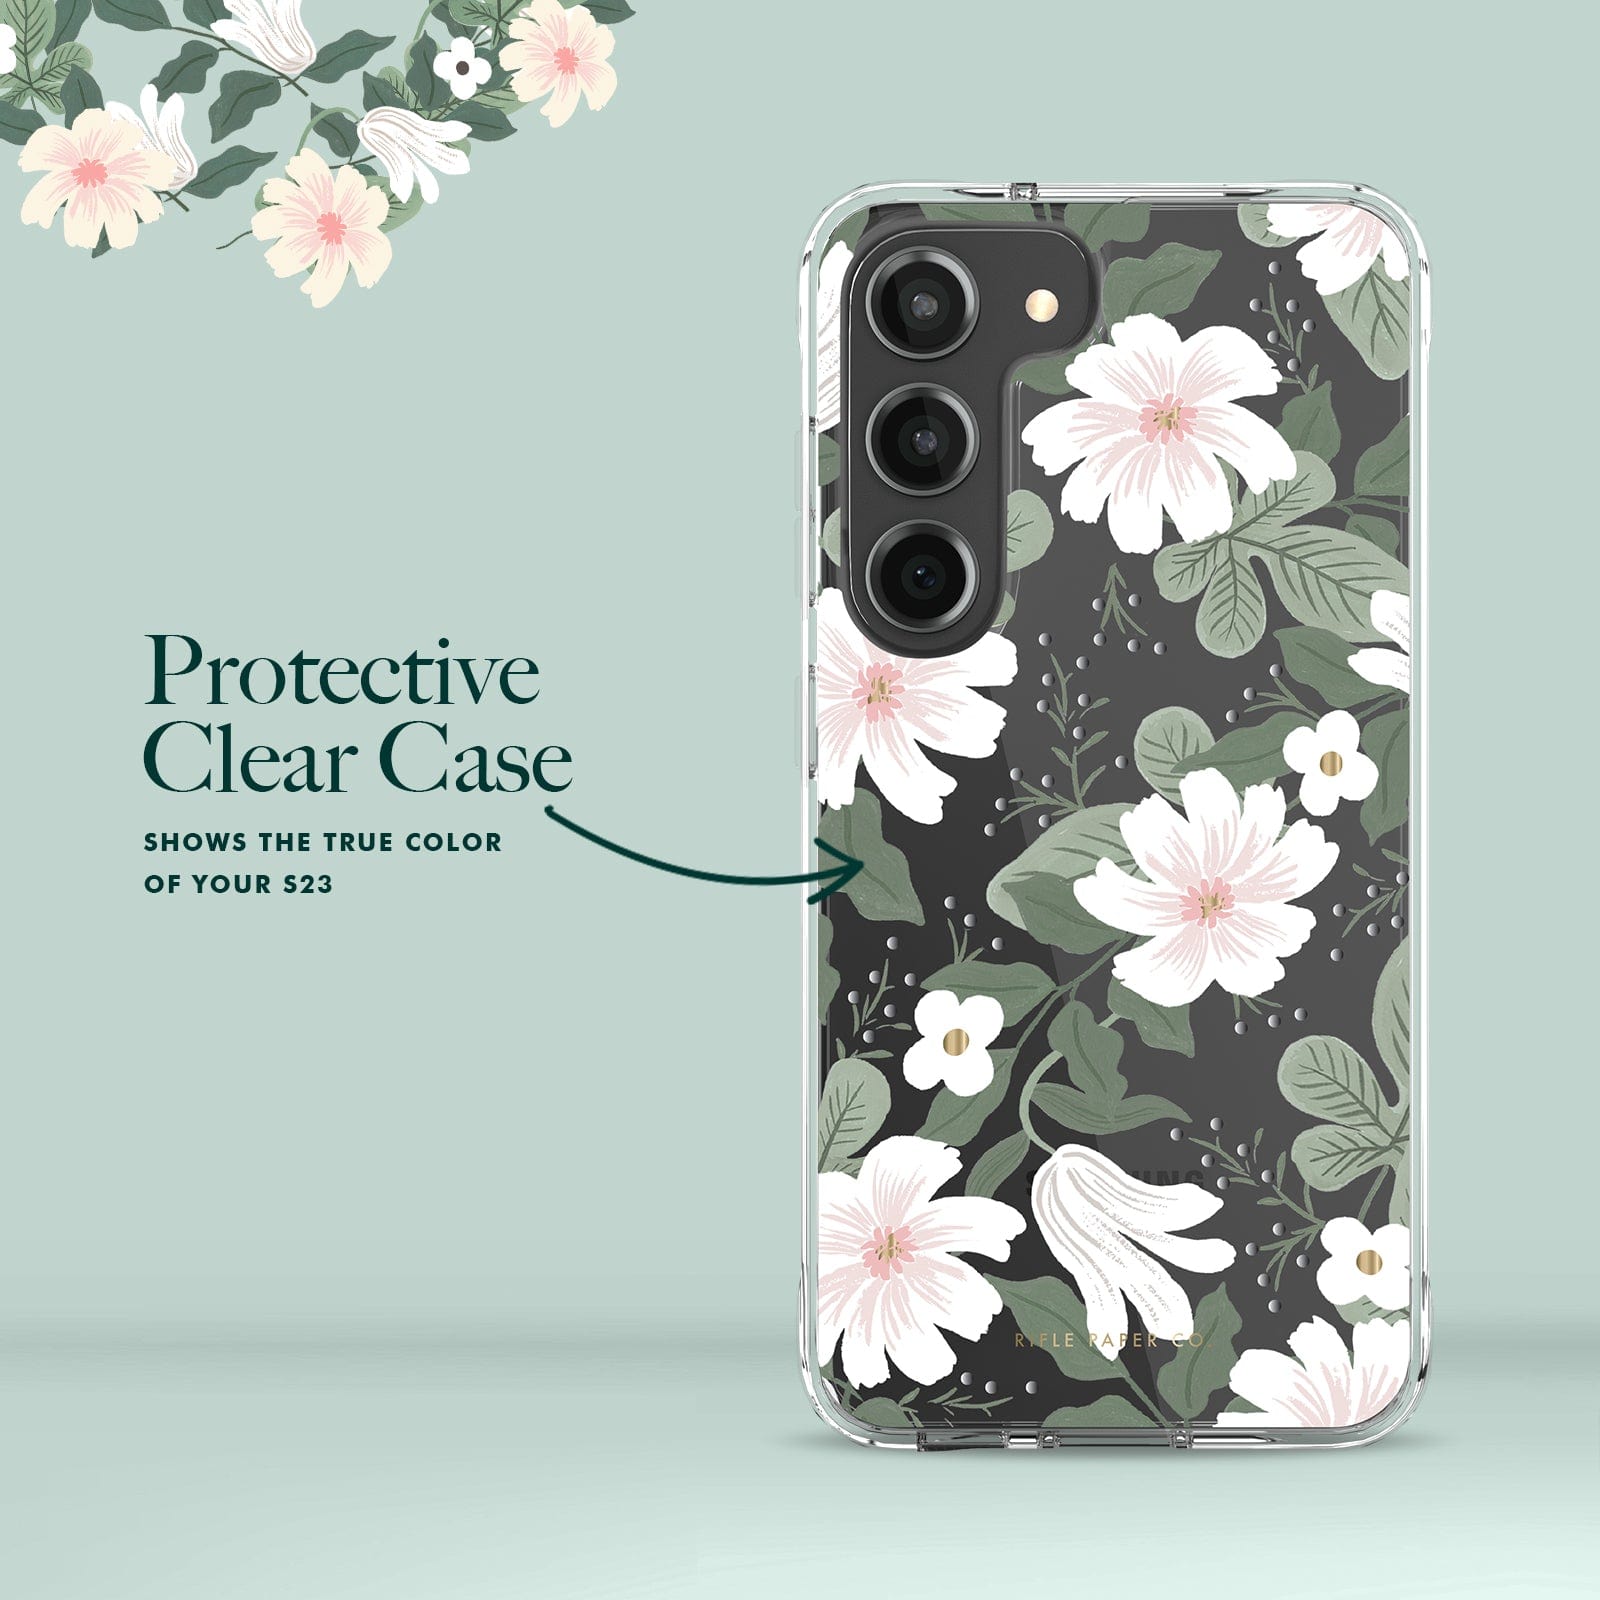 PROTECTIVE CLEAR CASE. SHWOS THE TRUE COLOR OF YOUR S23.